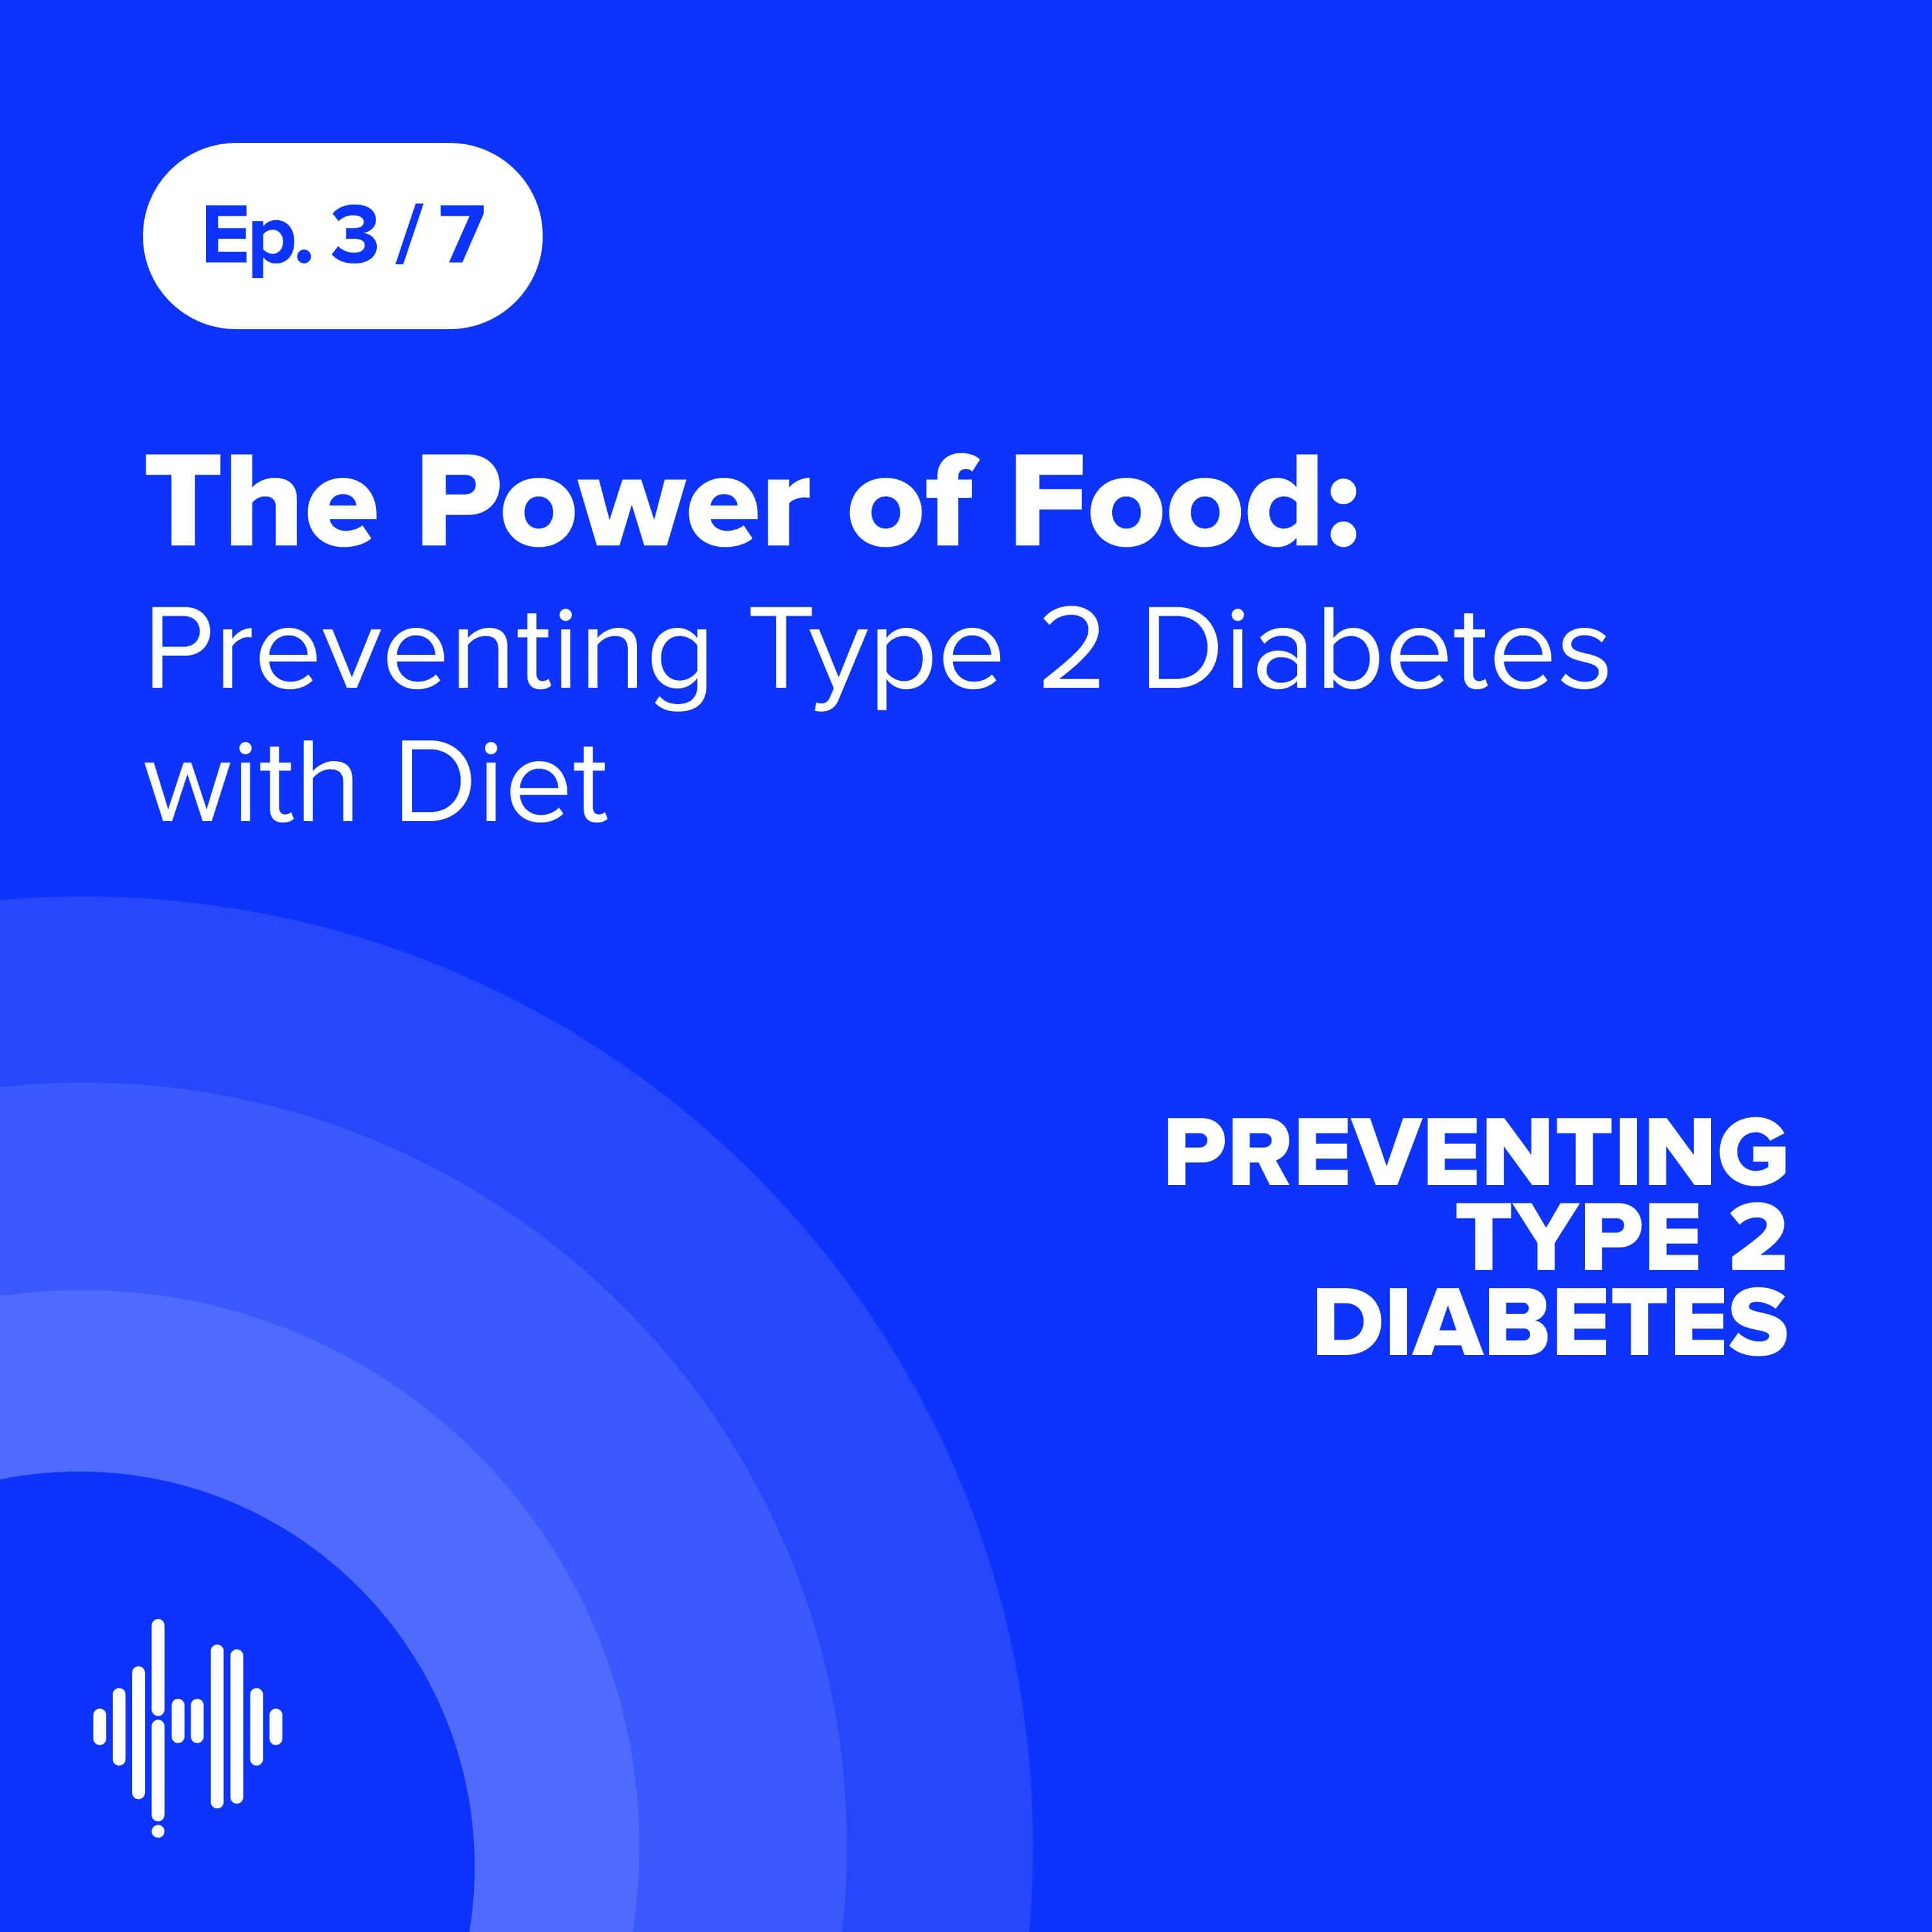 Ep 3: The Power of Food: Preventing Type 2 Diabetes with Diet